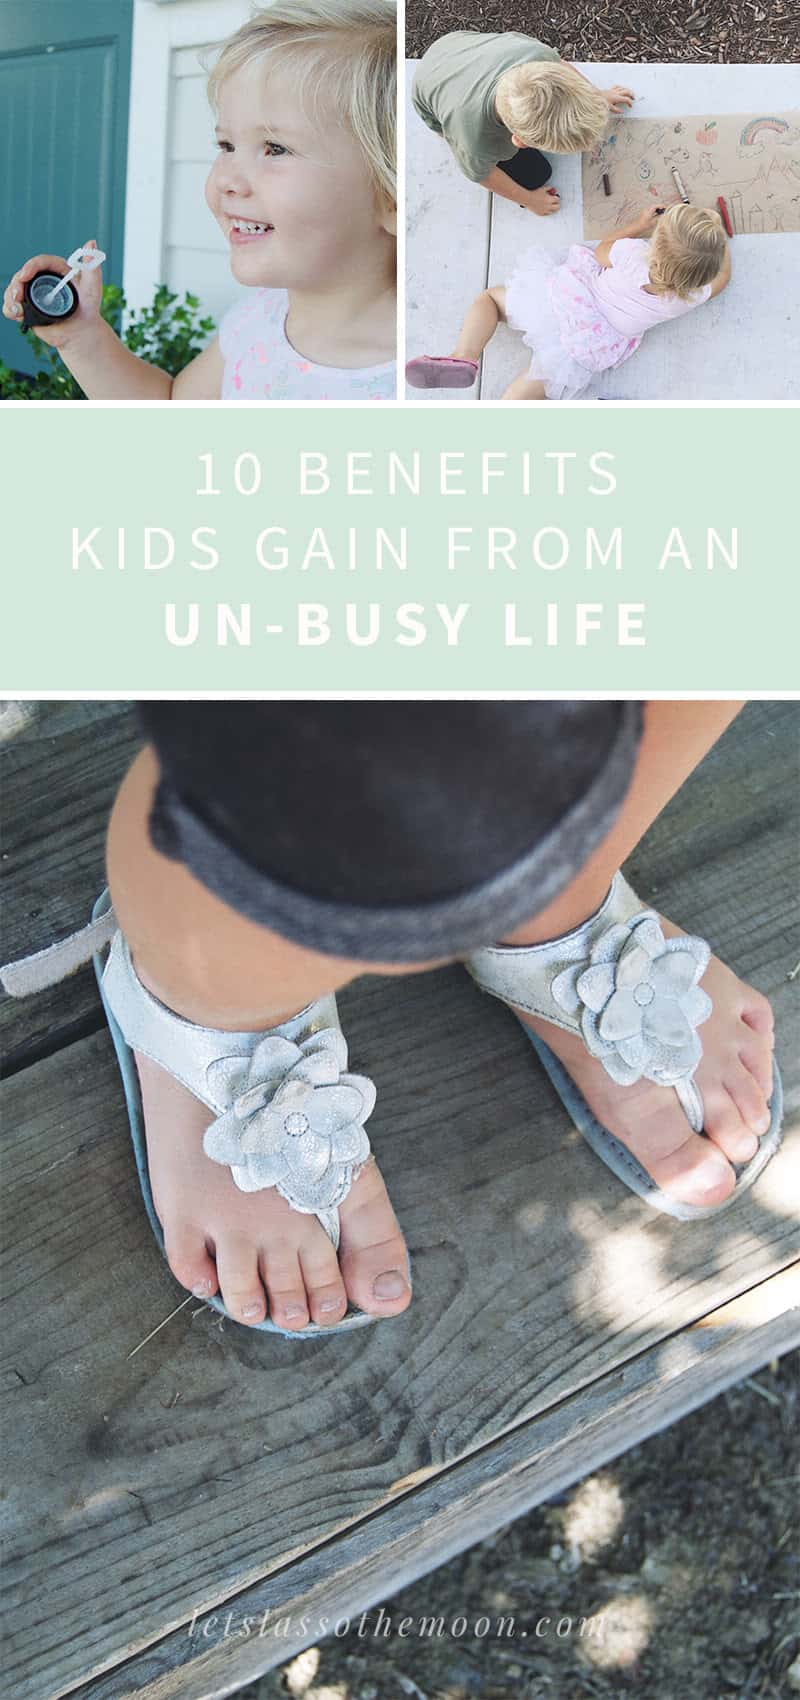 10 Benefits Kids Gain From An UN-BUSY Life: Life should be taken at the pace that suits you and your family. Embrace an un-busy life today. Enjoy these ten benefits to living slow (and purposefully) with your kids. *Loved this post! Such a good read for parents.